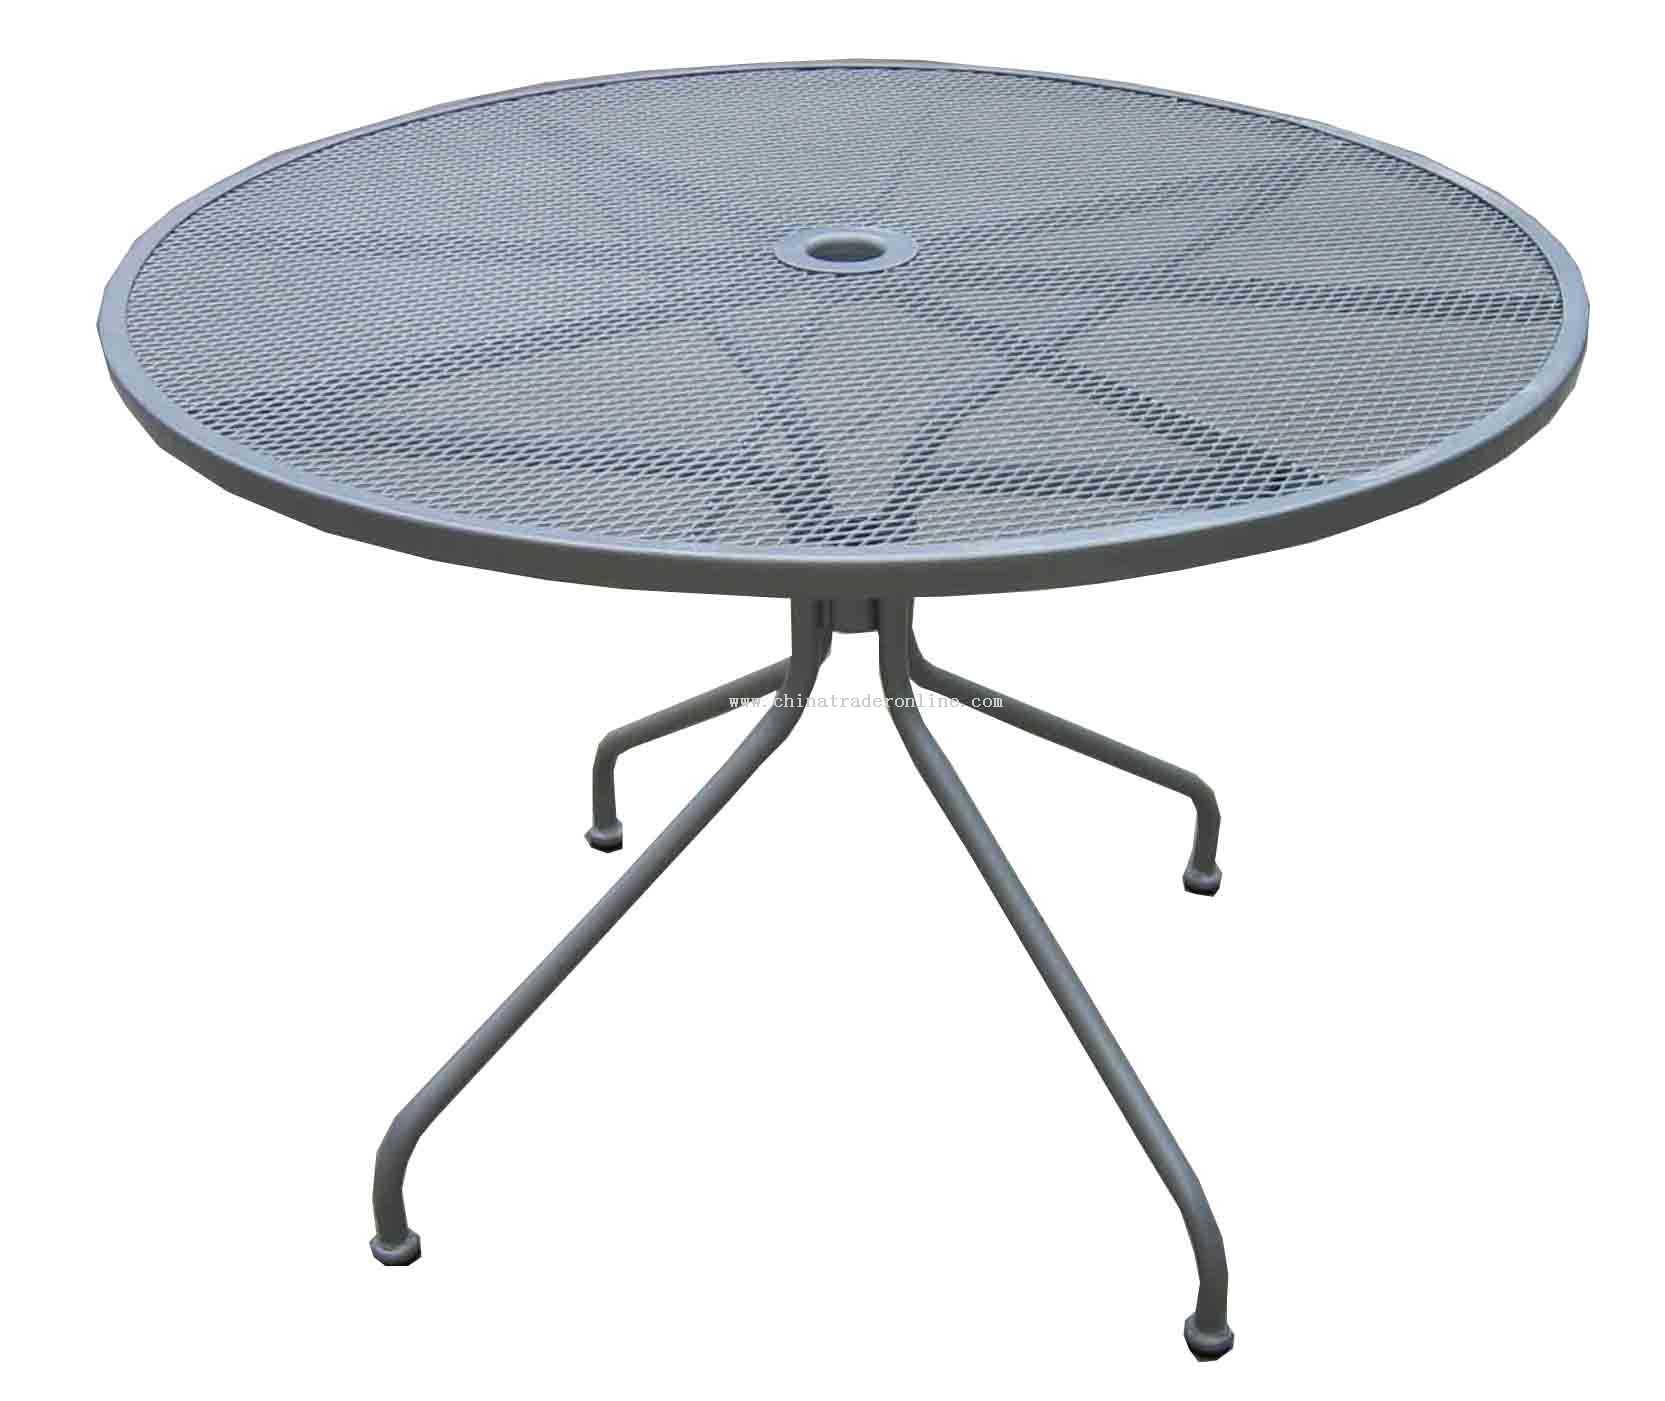 steel mesh table from China